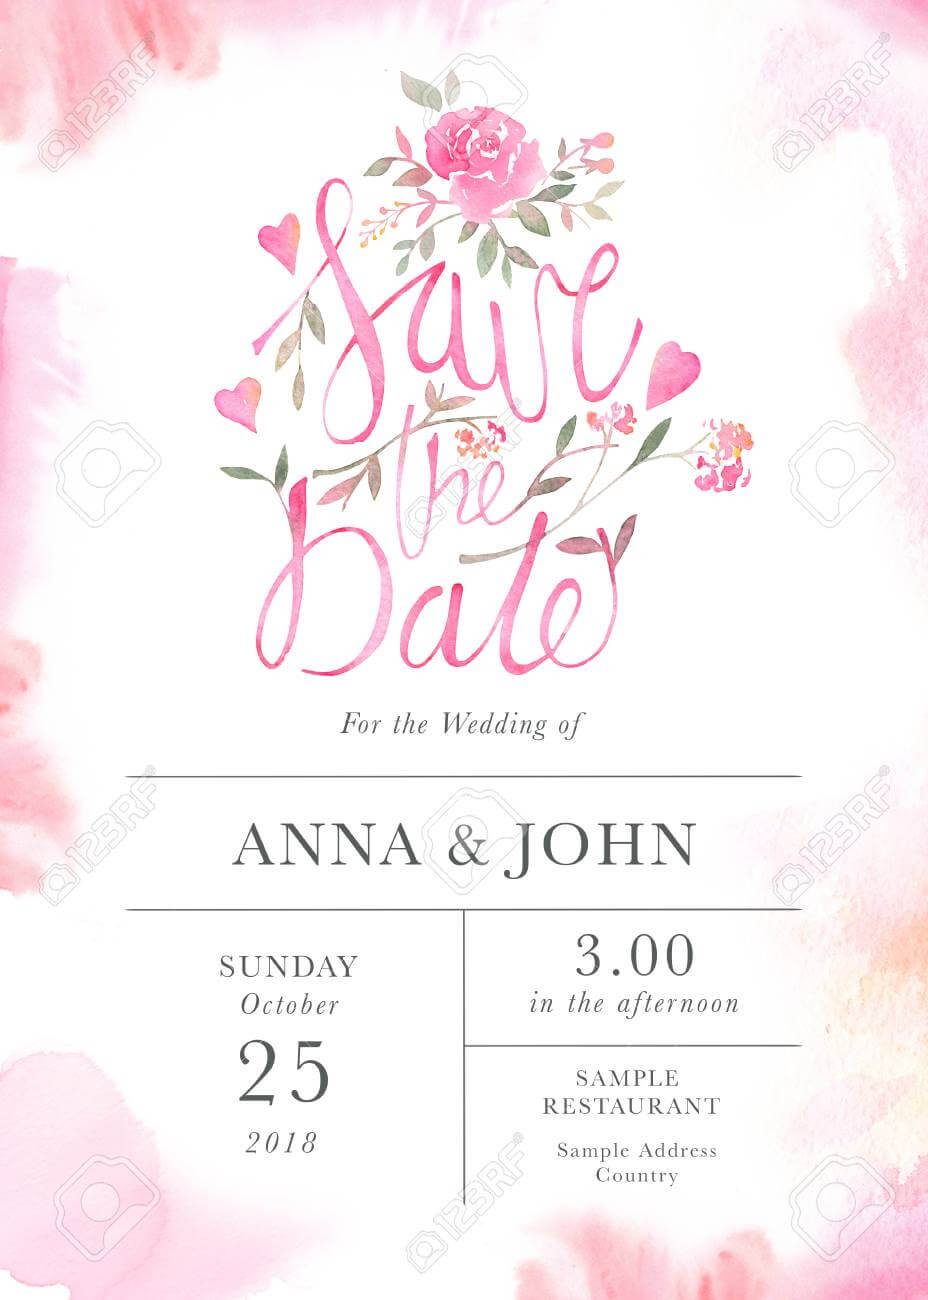 Wedding Invitation Card Template With Watercolor Rose Flowers With Regard To Sample Wedding Invitation Cards Templates